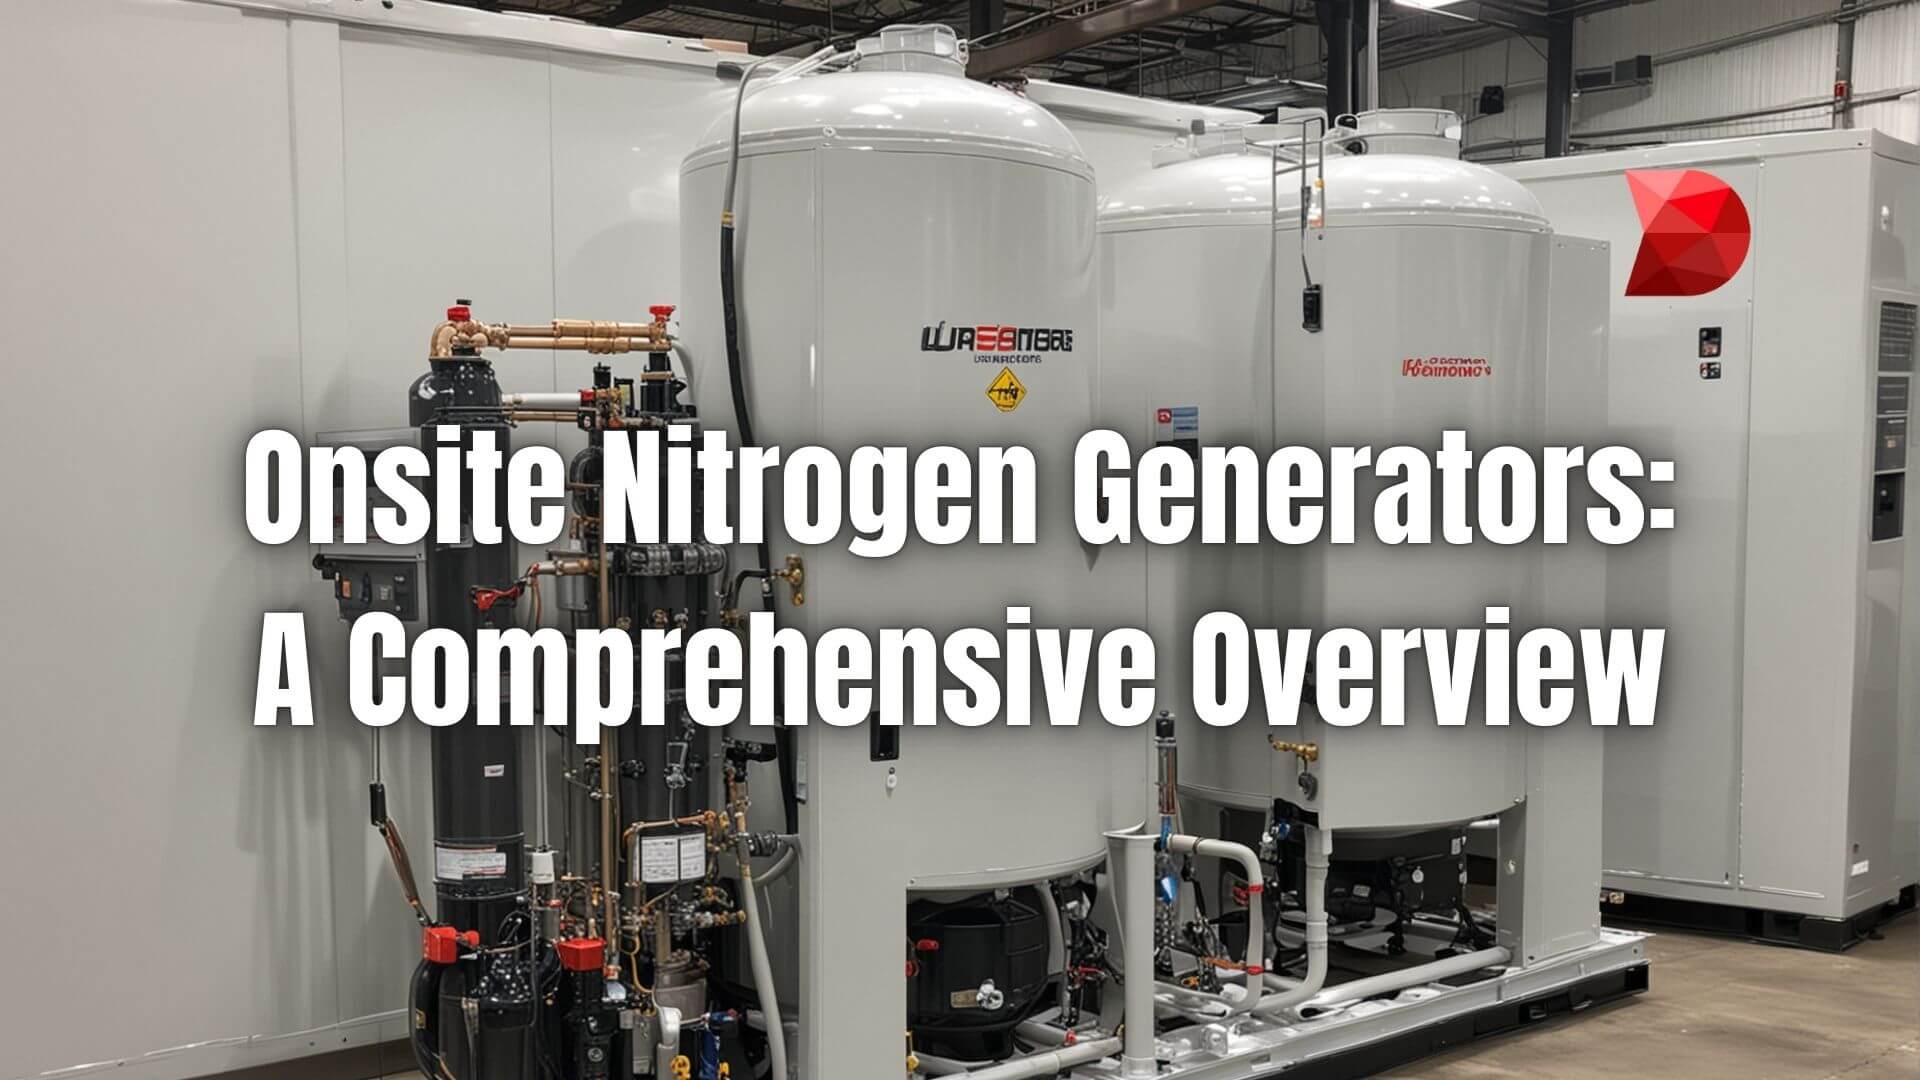 Unlock the benefits of industrial nitrogen generators with our guide. Learn how to enhance operations and streamline processes effectively.